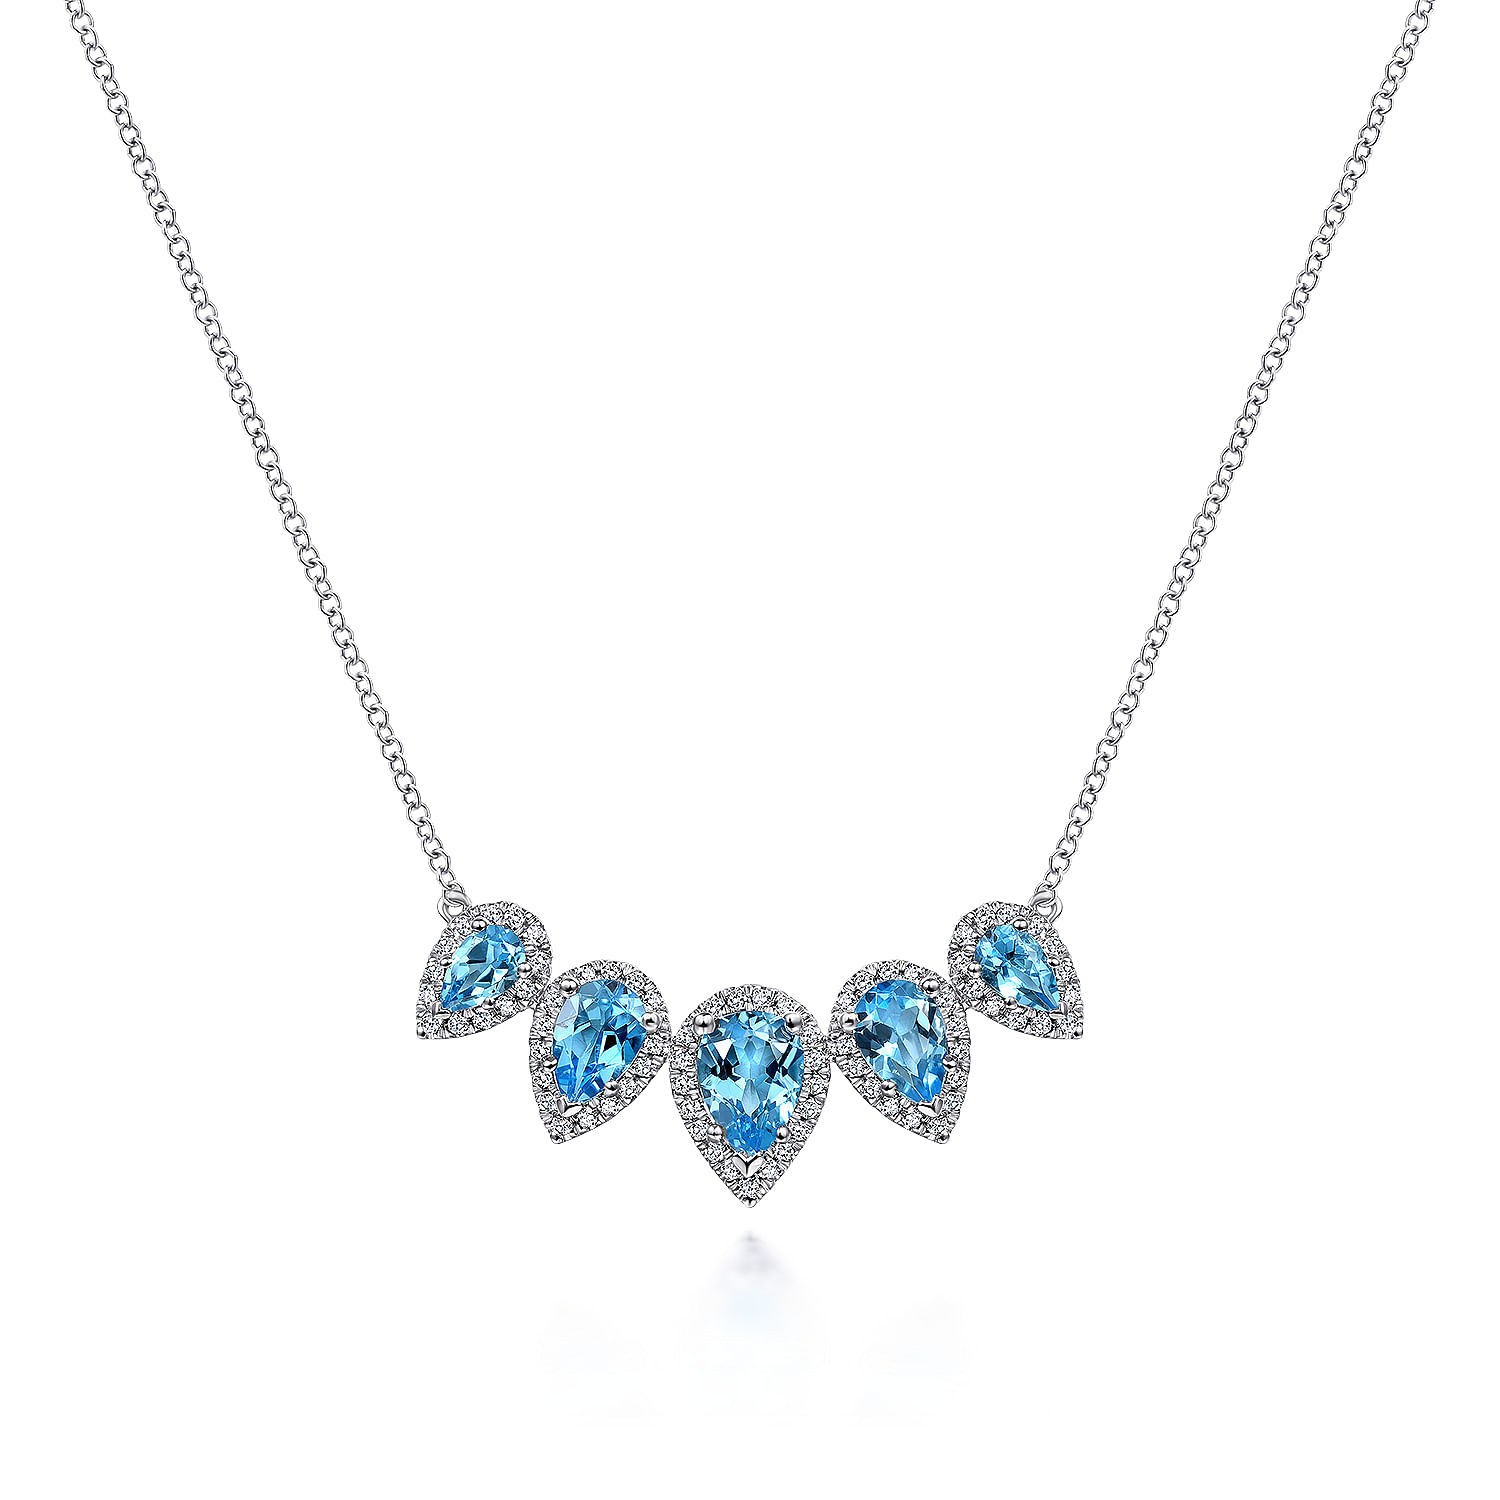 Graduating 14K White Gold Pear Shaped Blue Topaz and Diamond Halo Necklace